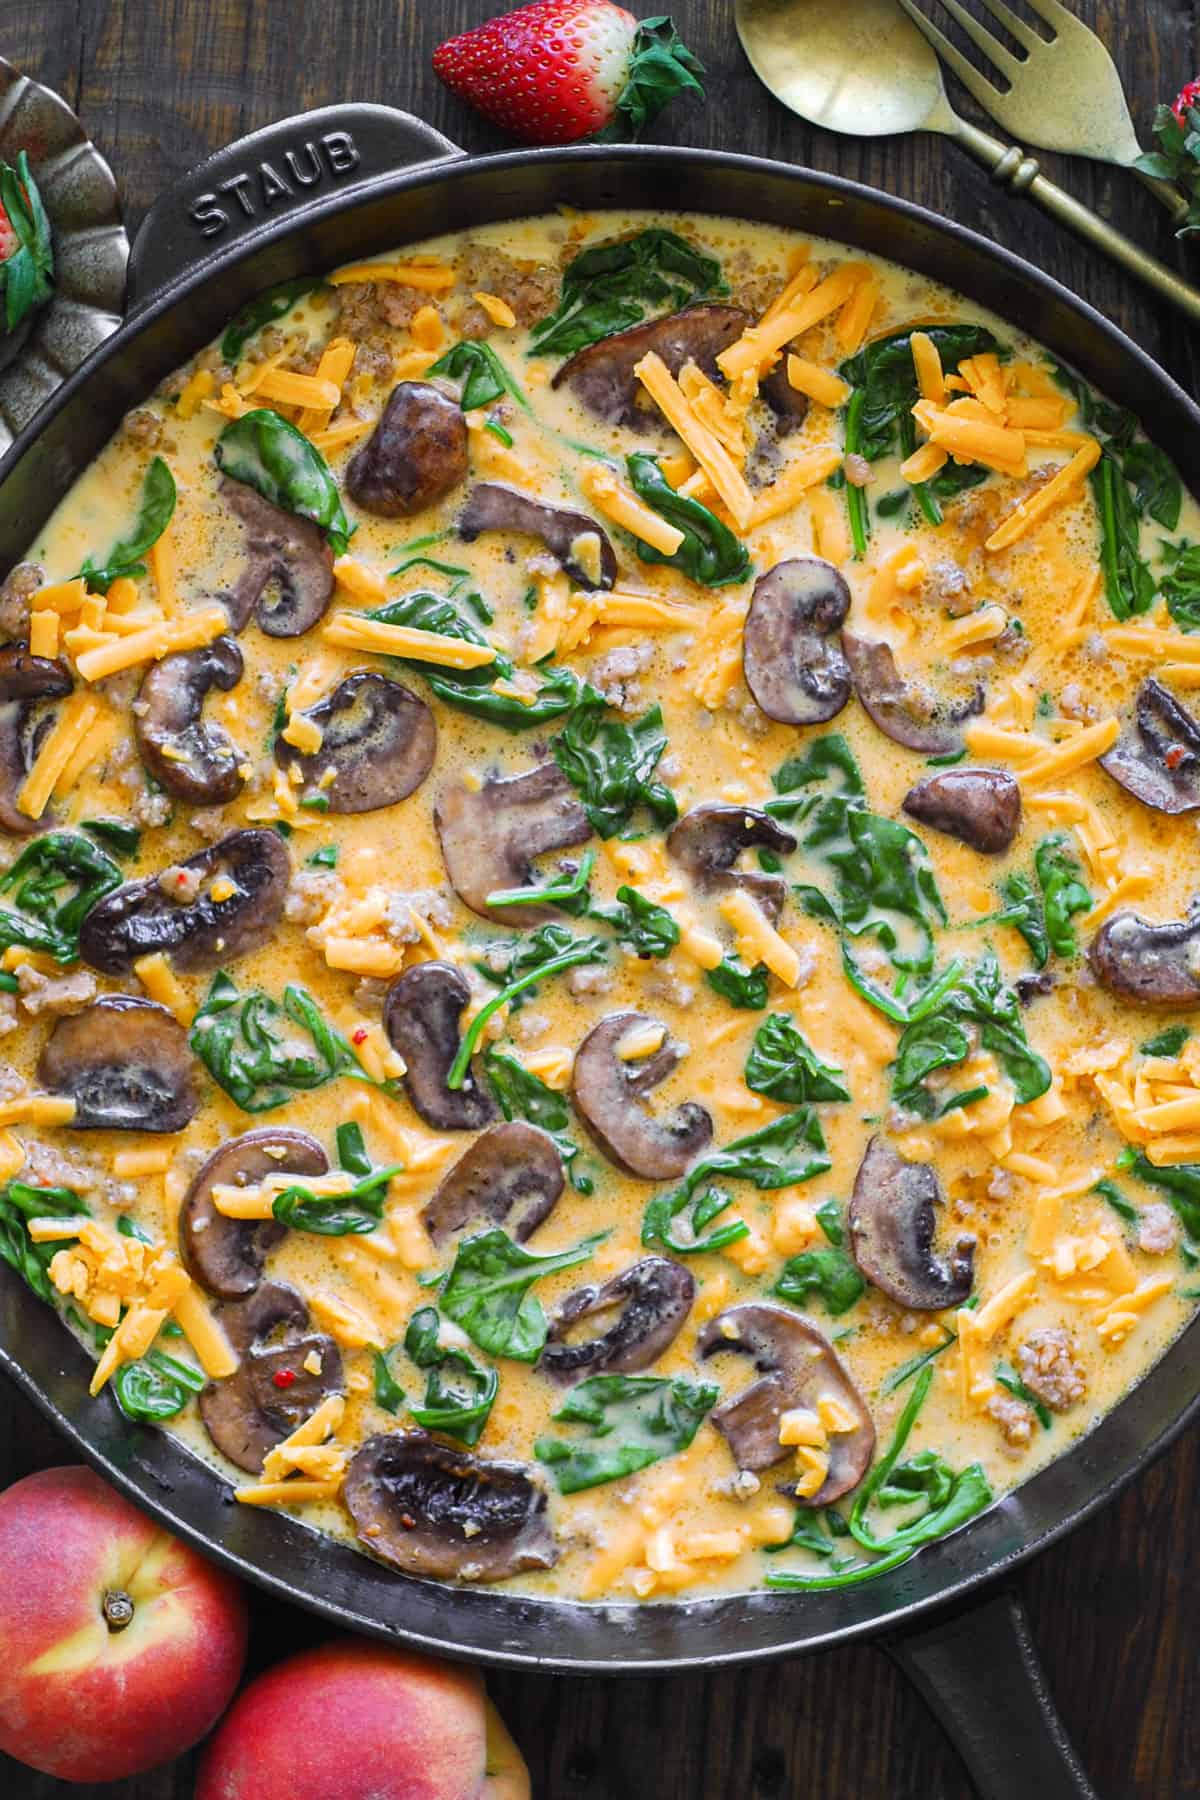 frittata ingredients (crumbled sausage, mushrooms, spinach, eggs, and shredded cheddar cheese) in a cast iron skillet.